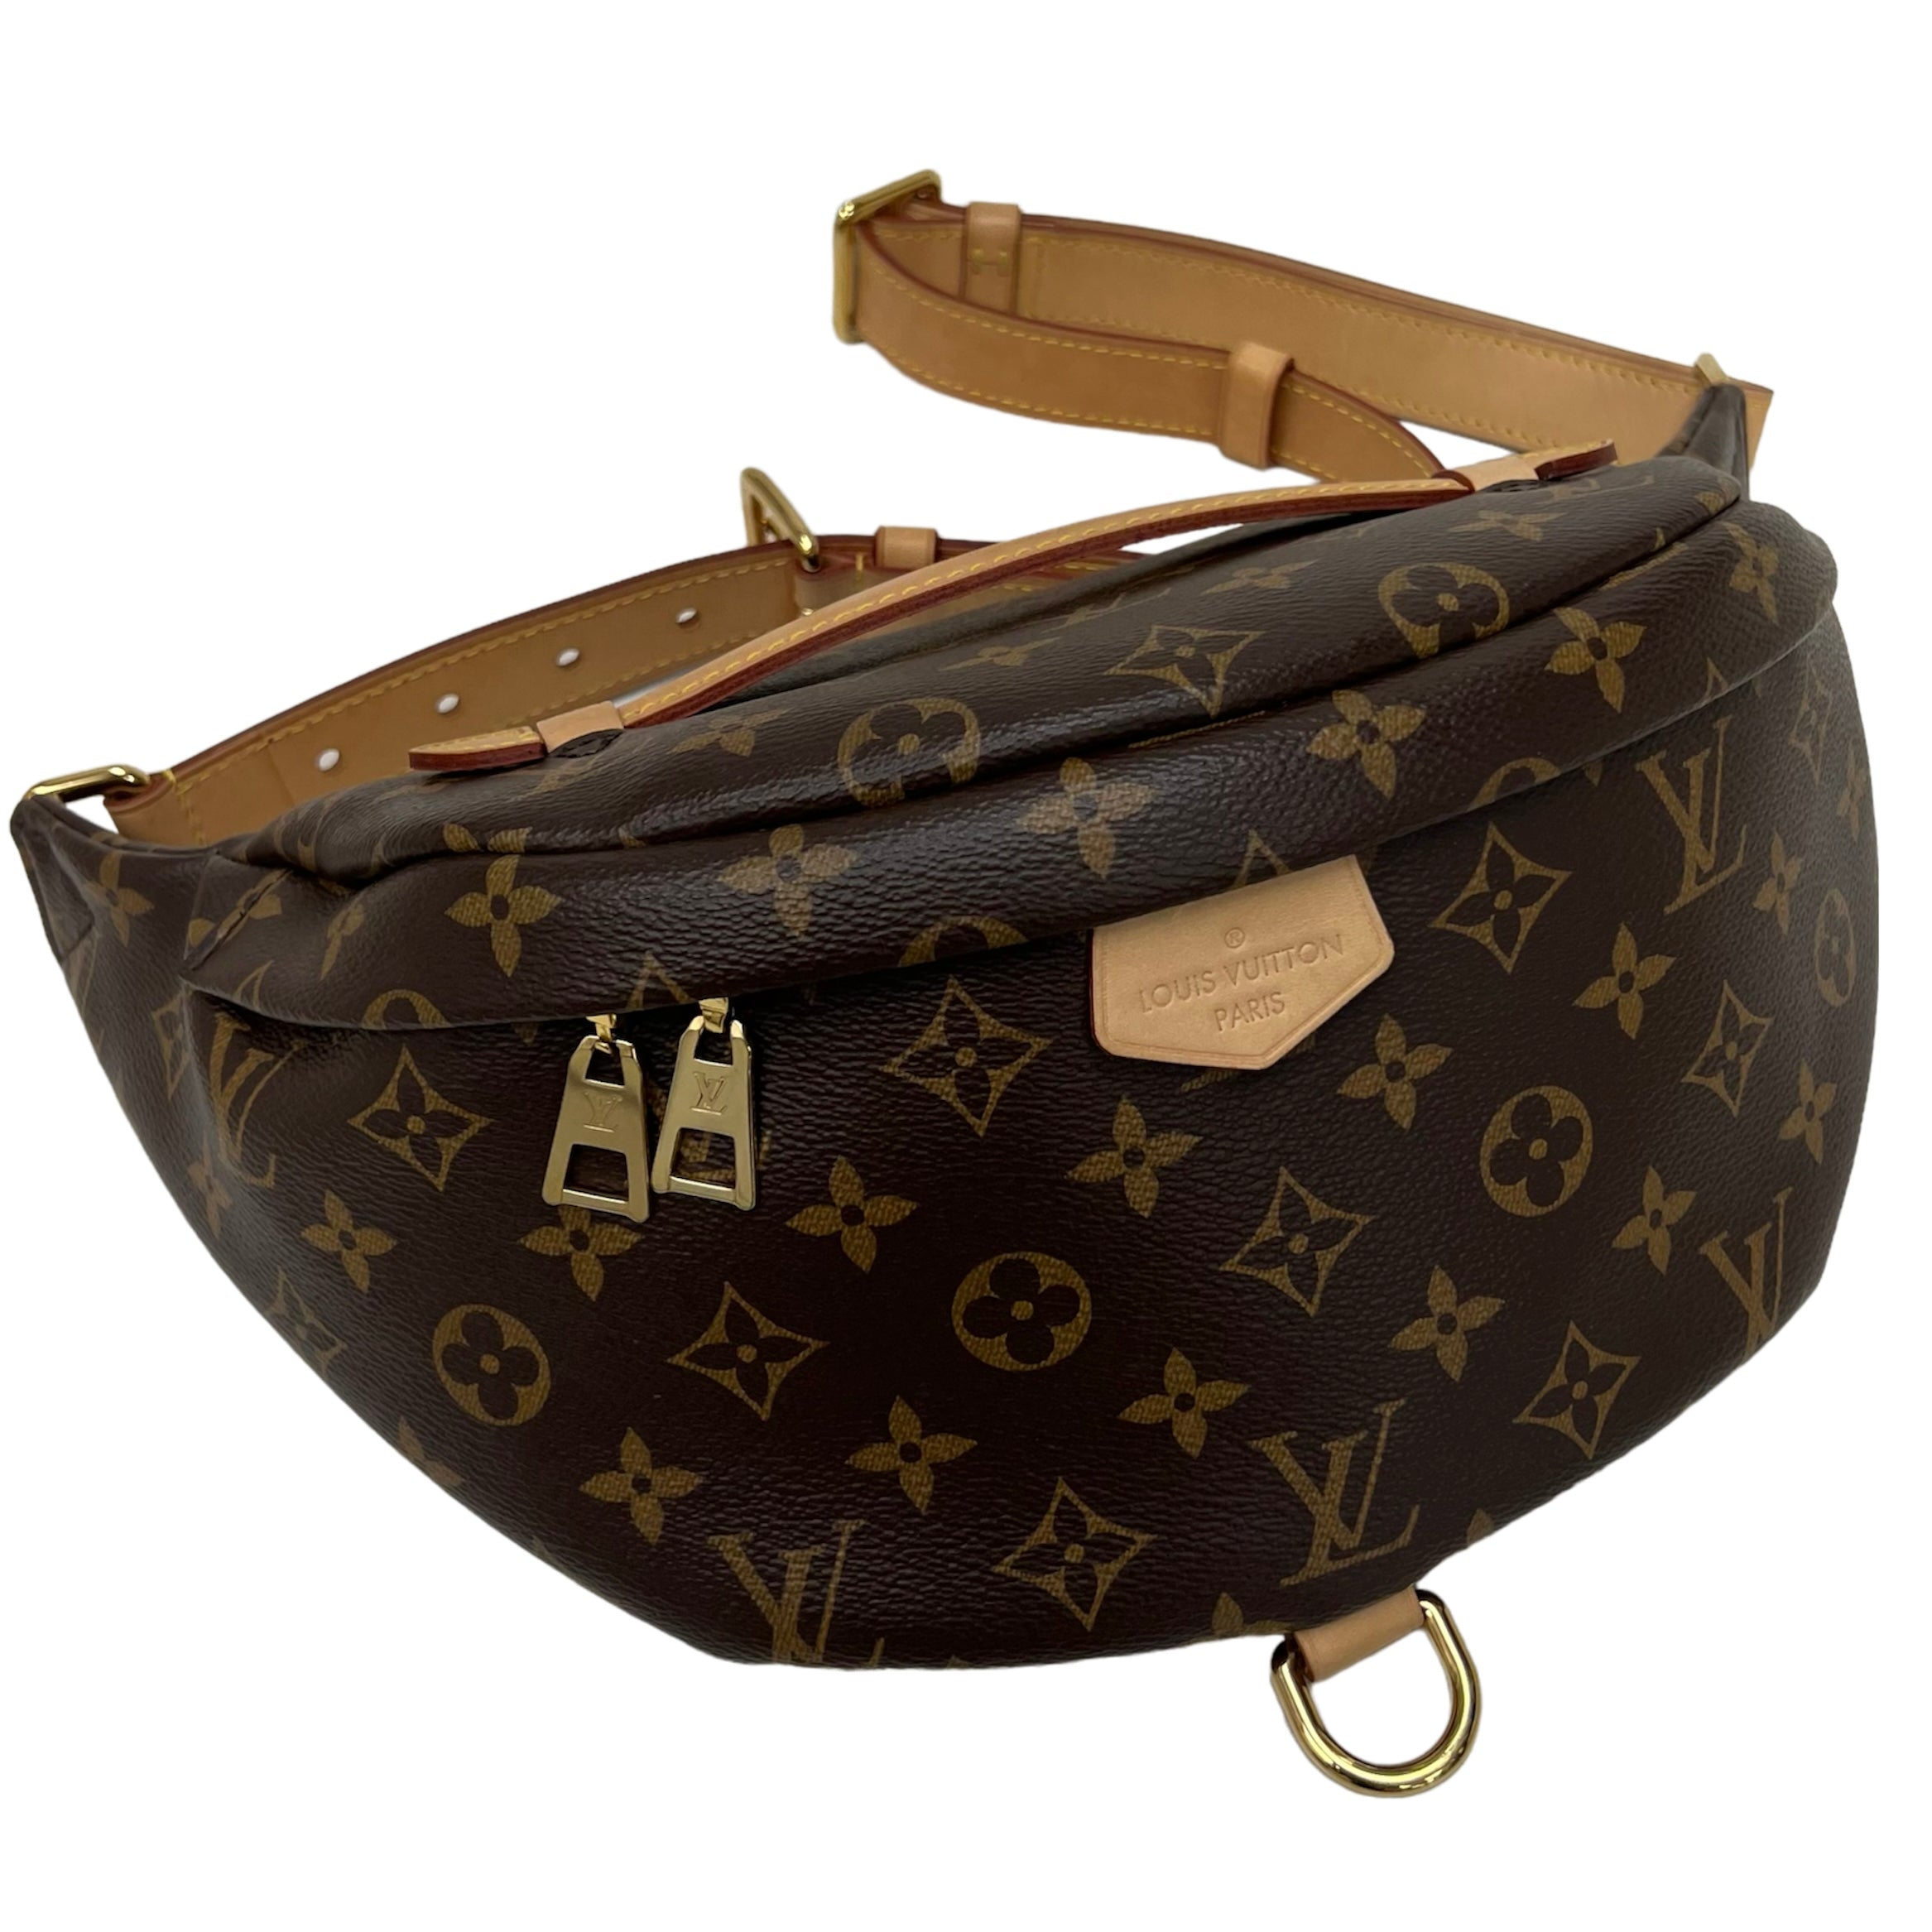 BOUJEE ON A BUDGET  LOUIS VUITTON BUMBAG 